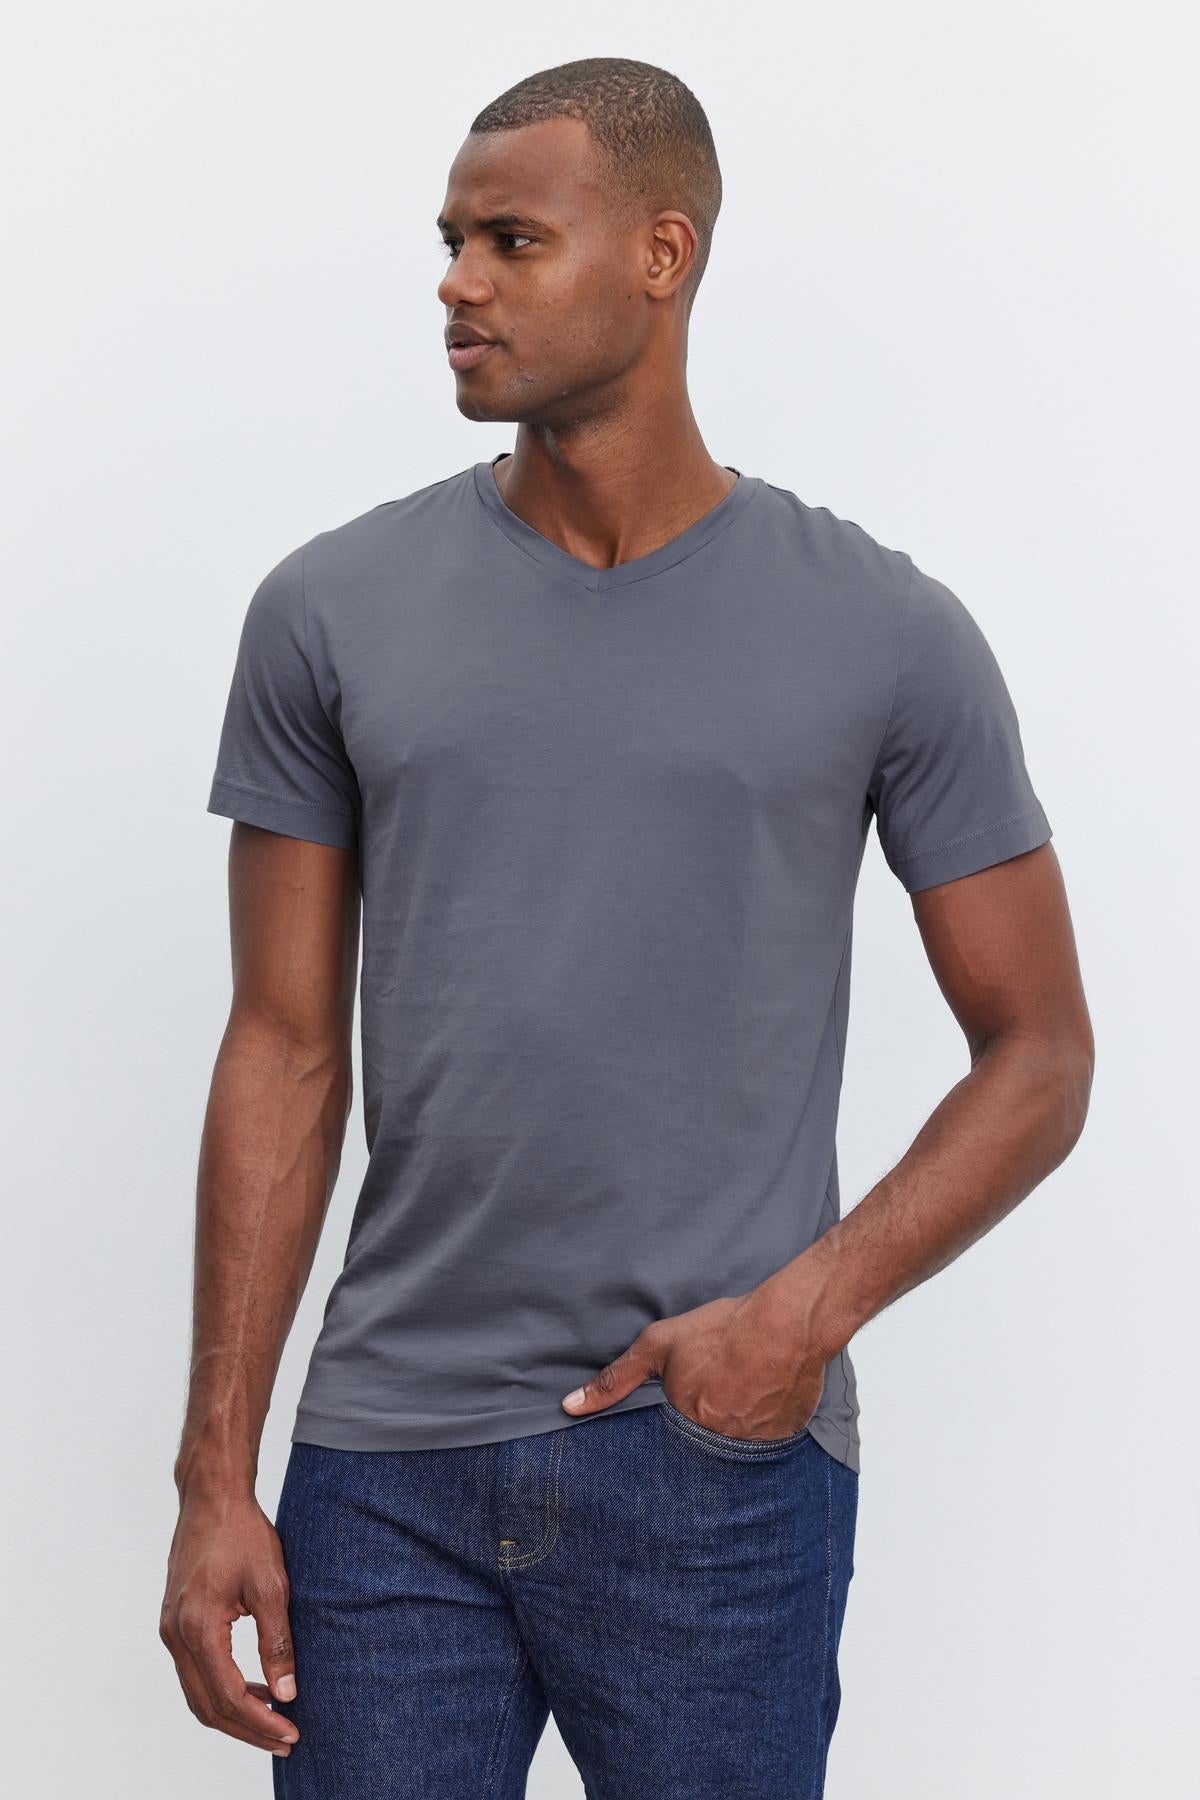 A person in a SAMSEN TEE by Velvet by Graham & Spencer with a v-neckline and blue jeans stands with one hand in their pocket, looking to the side against a plain white background—perfect for everyday wear.-37386135240897